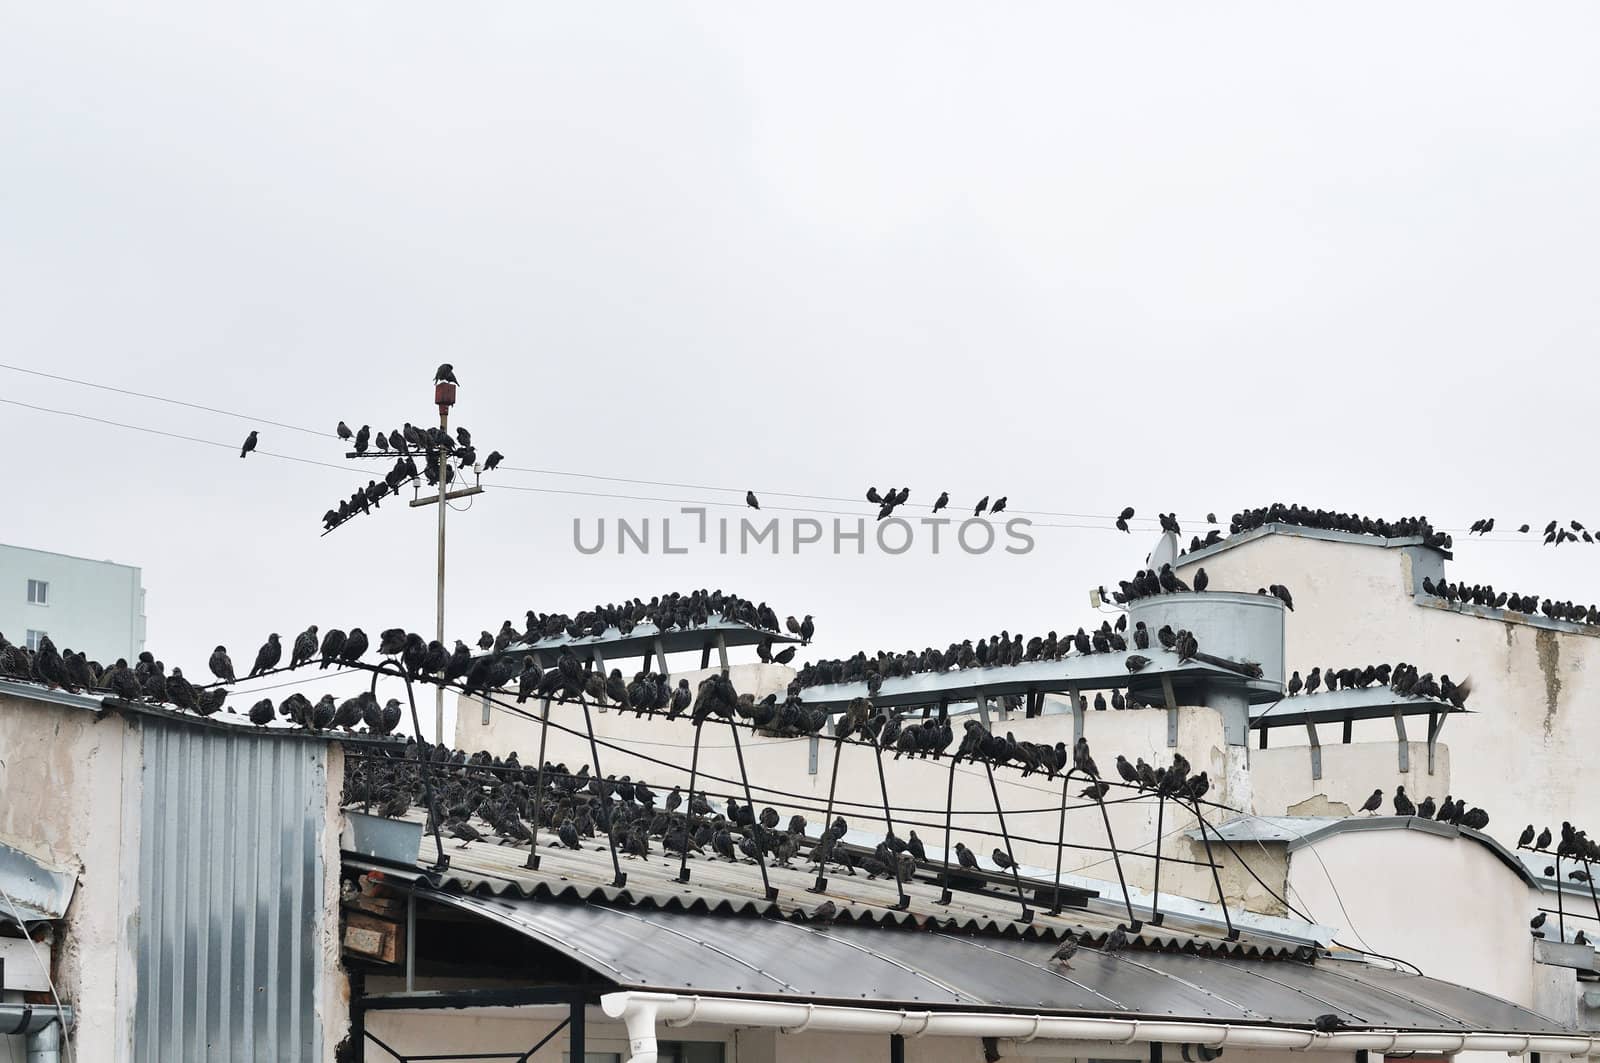  invasion of starlings on the roof of house in winter time